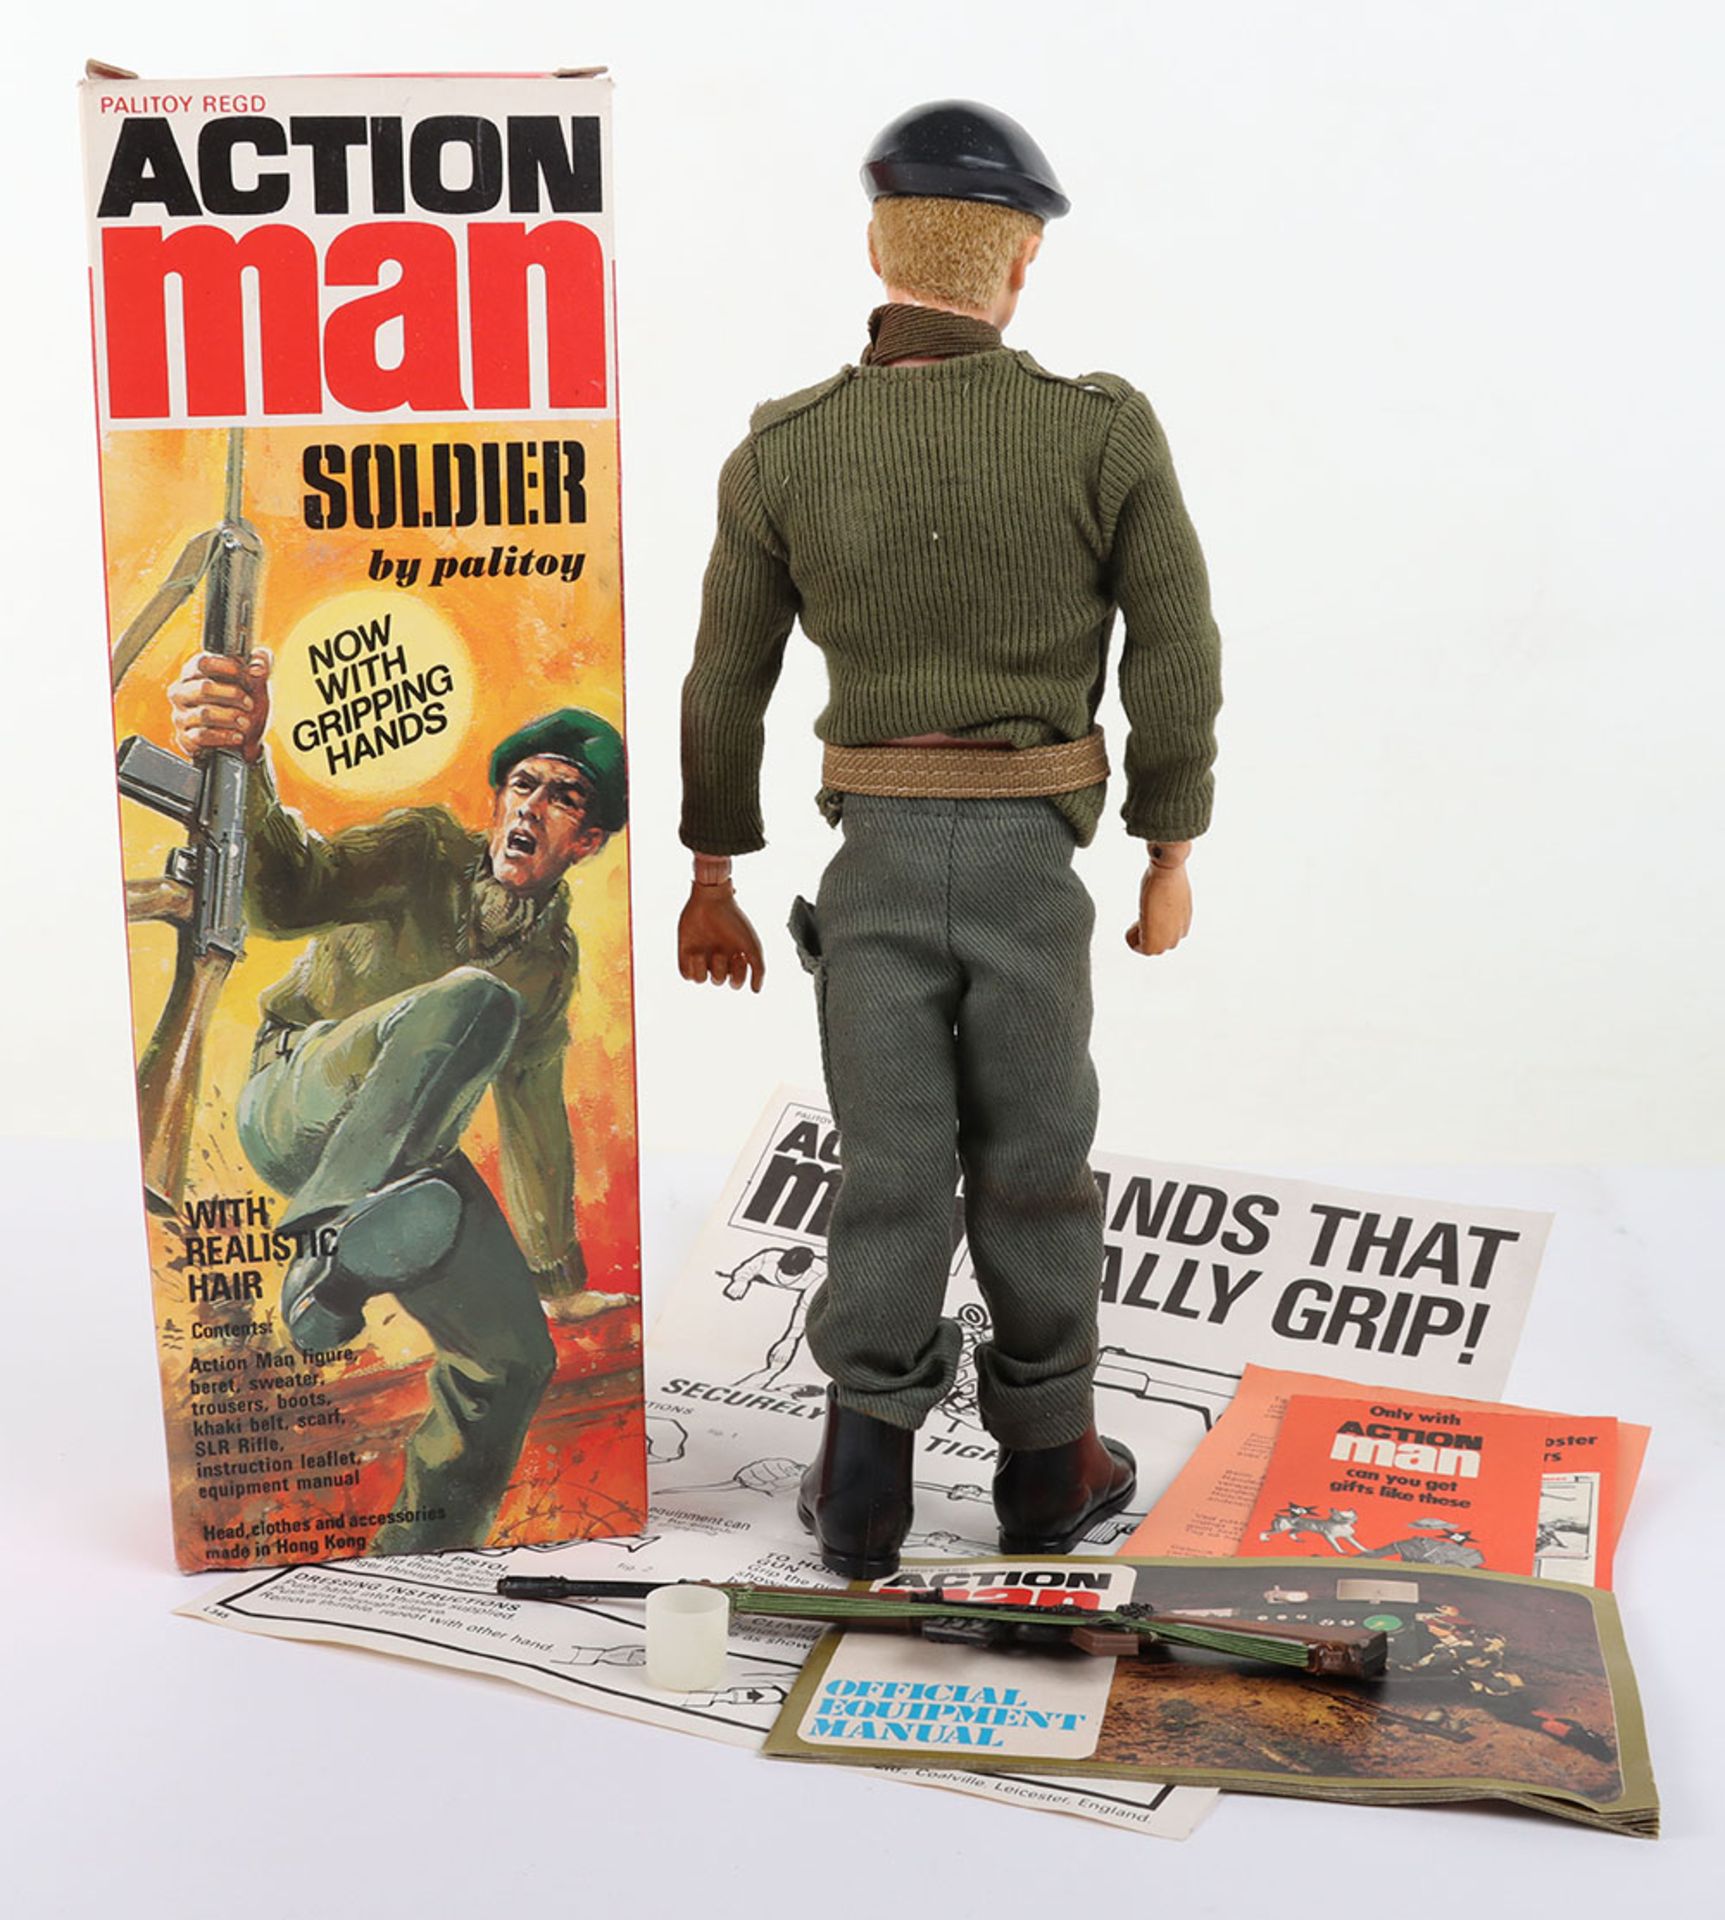 Action Man Boxed Vintage Soldier by Palitoy - Image 3 of 5